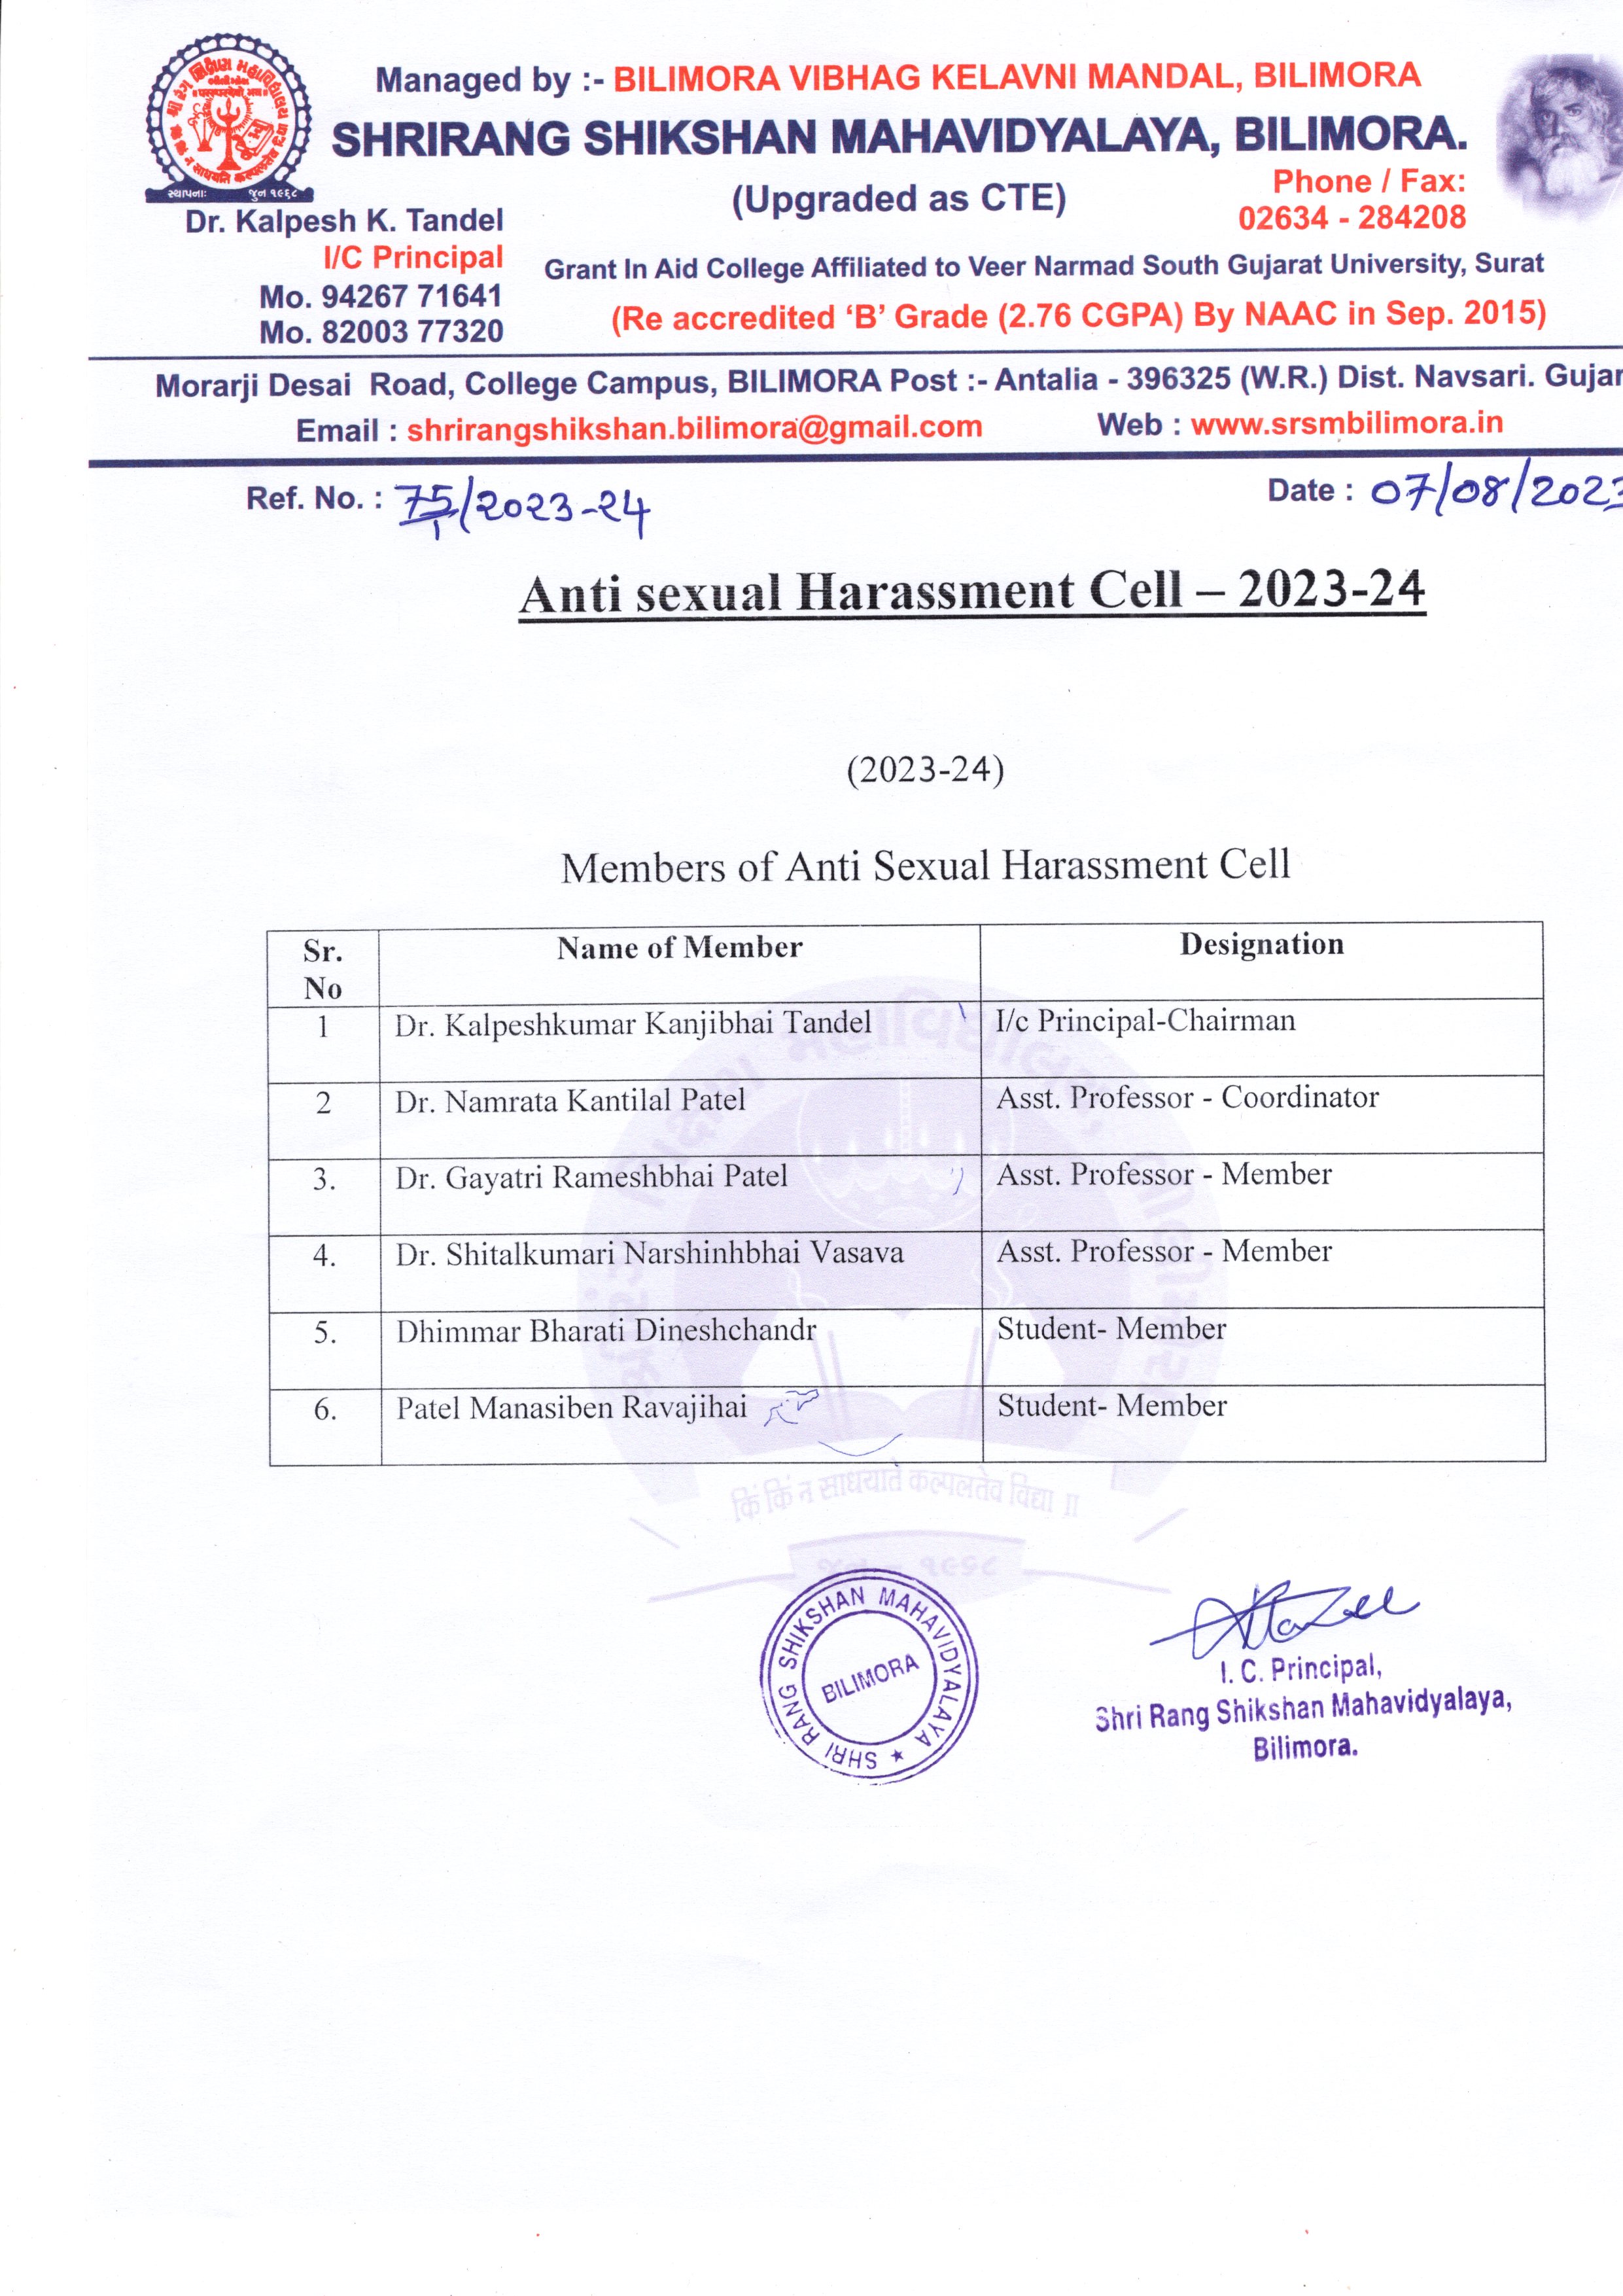 Anti Sexal Harassment Cell 2023-24